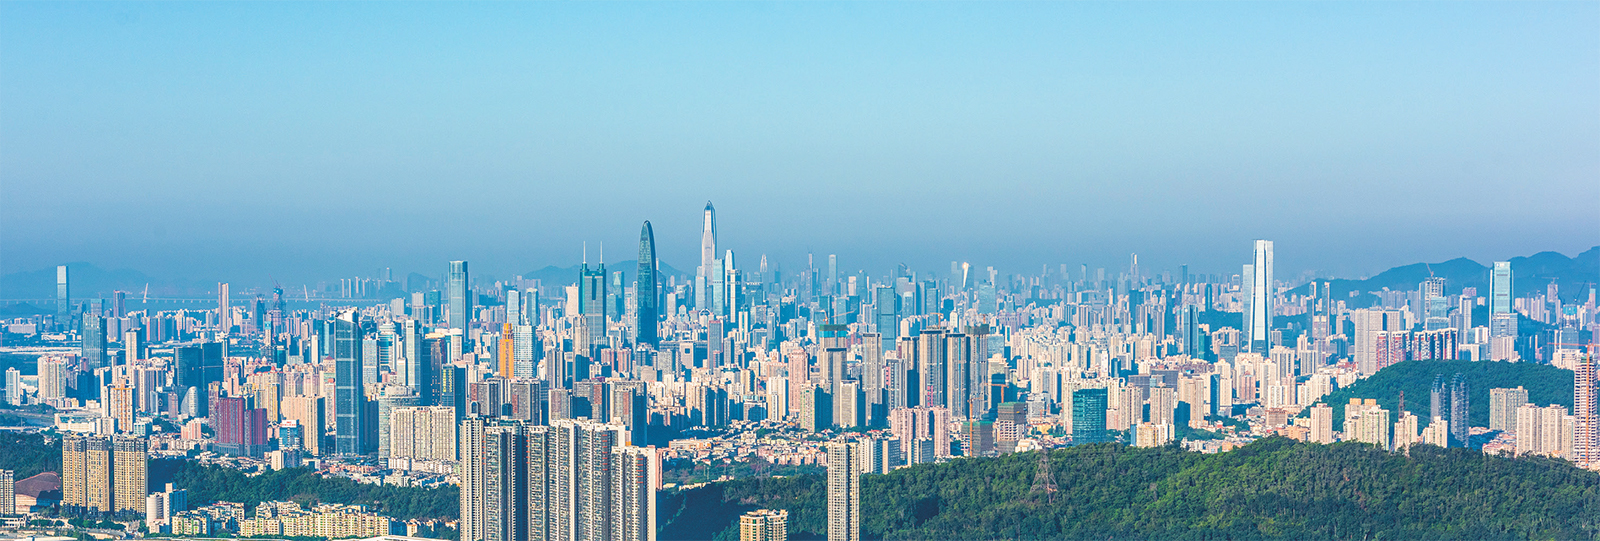 Shenzhen exemplifies rapid economic rise on the back of tech innovation